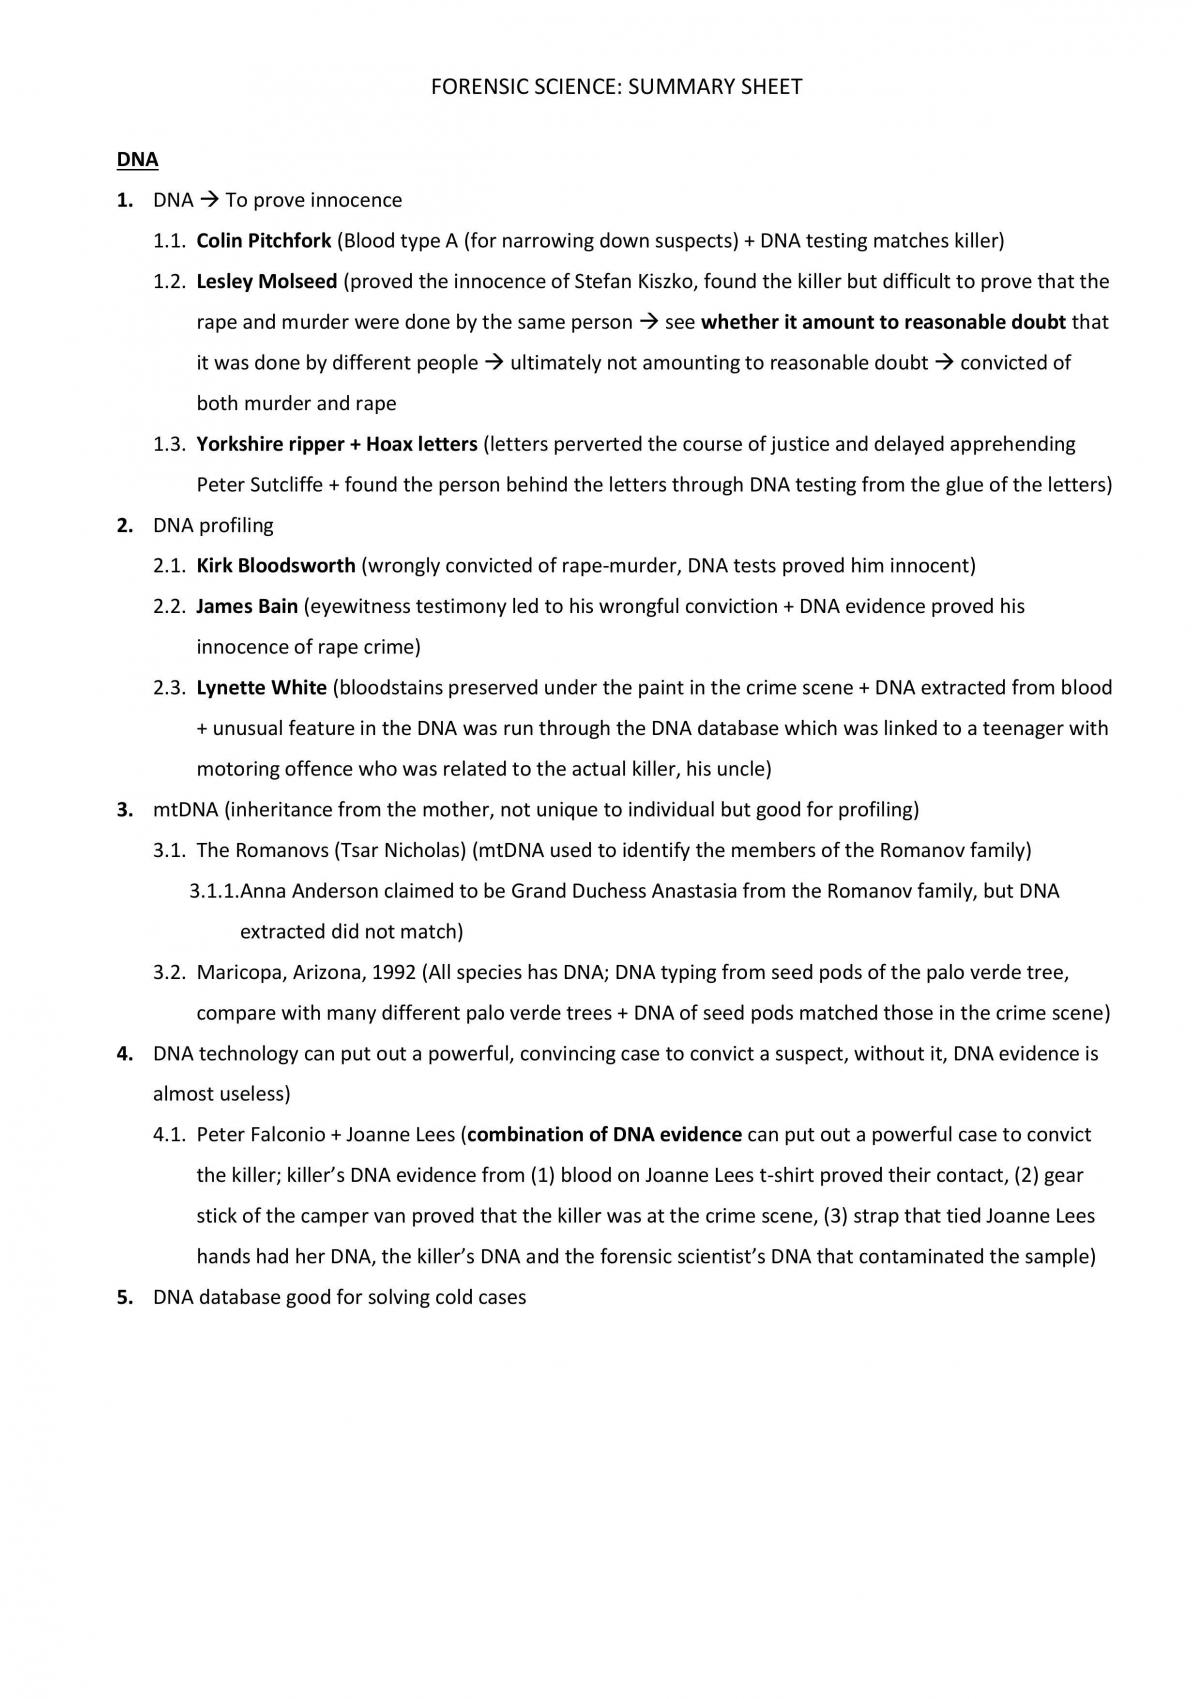 Summary Sheet for Forensic Science - Page 1